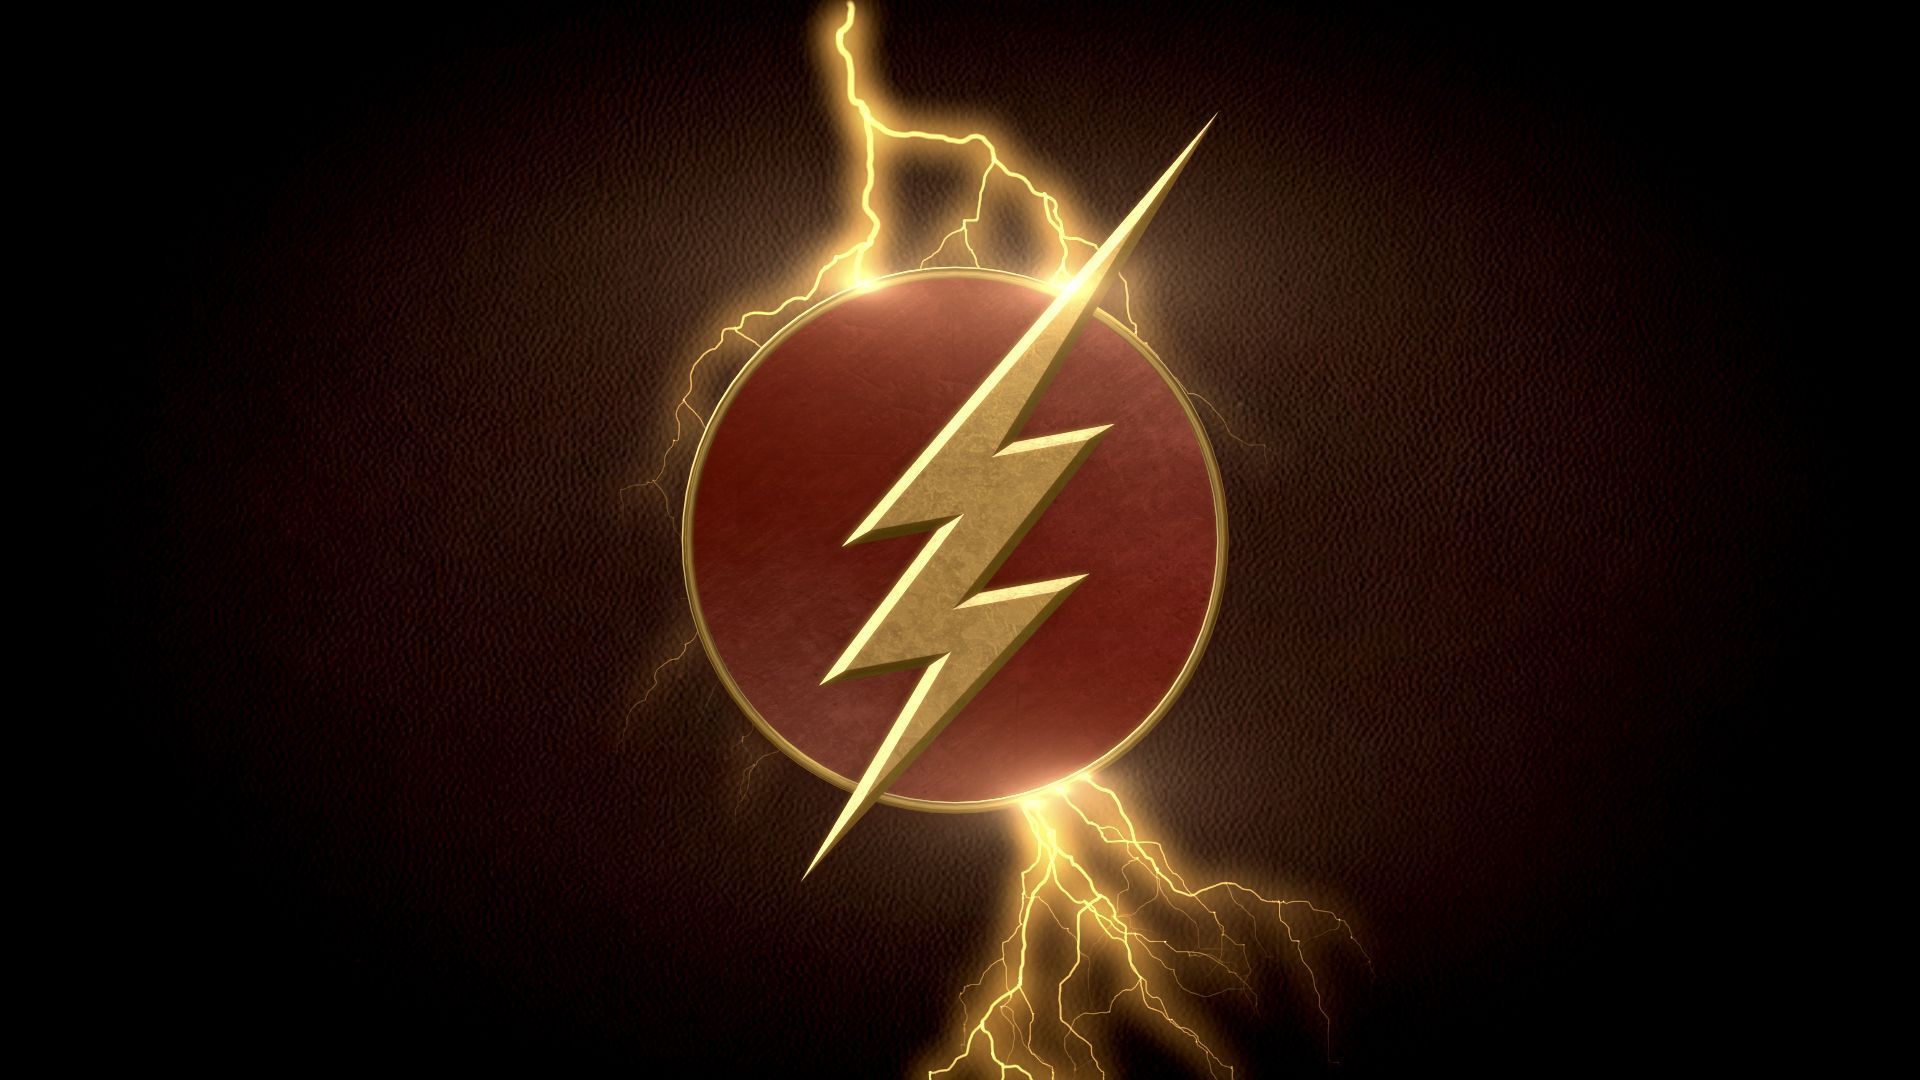 Here's a couple Flash wallpapers I made. (3840x1080 dual monitor ...